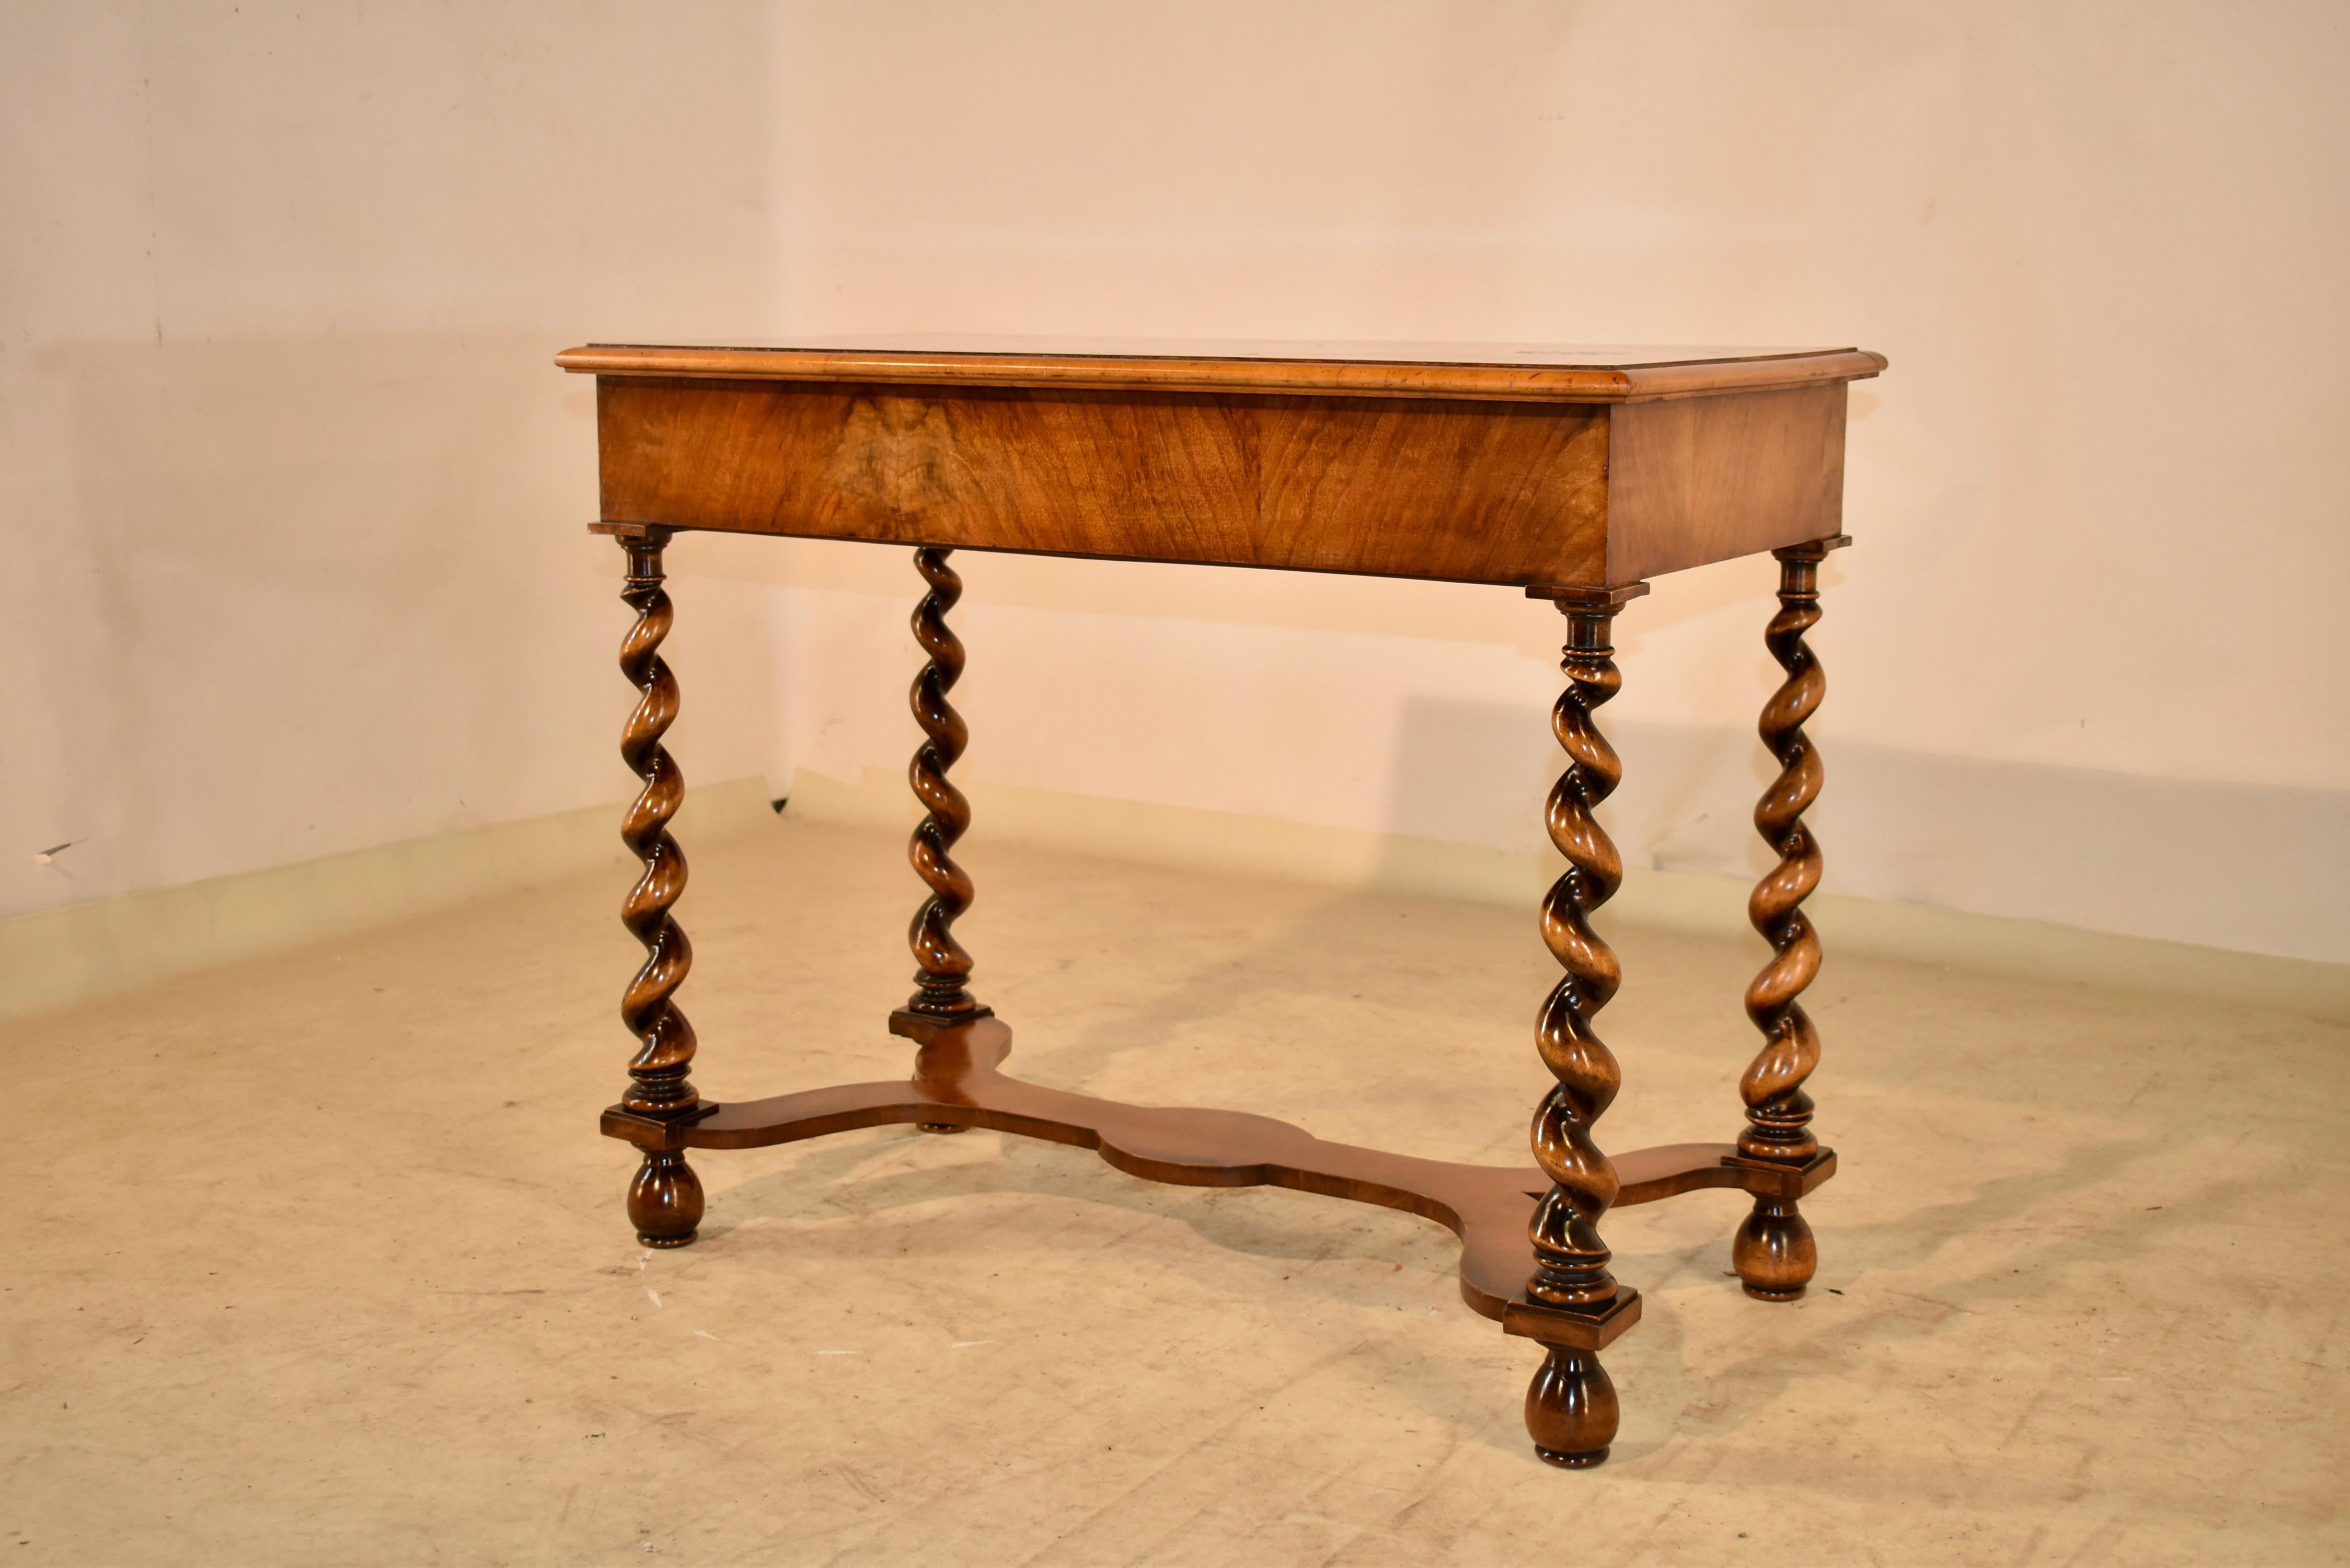 Edwardian English Marquetry Side Table, c. 1900 For Sale 4